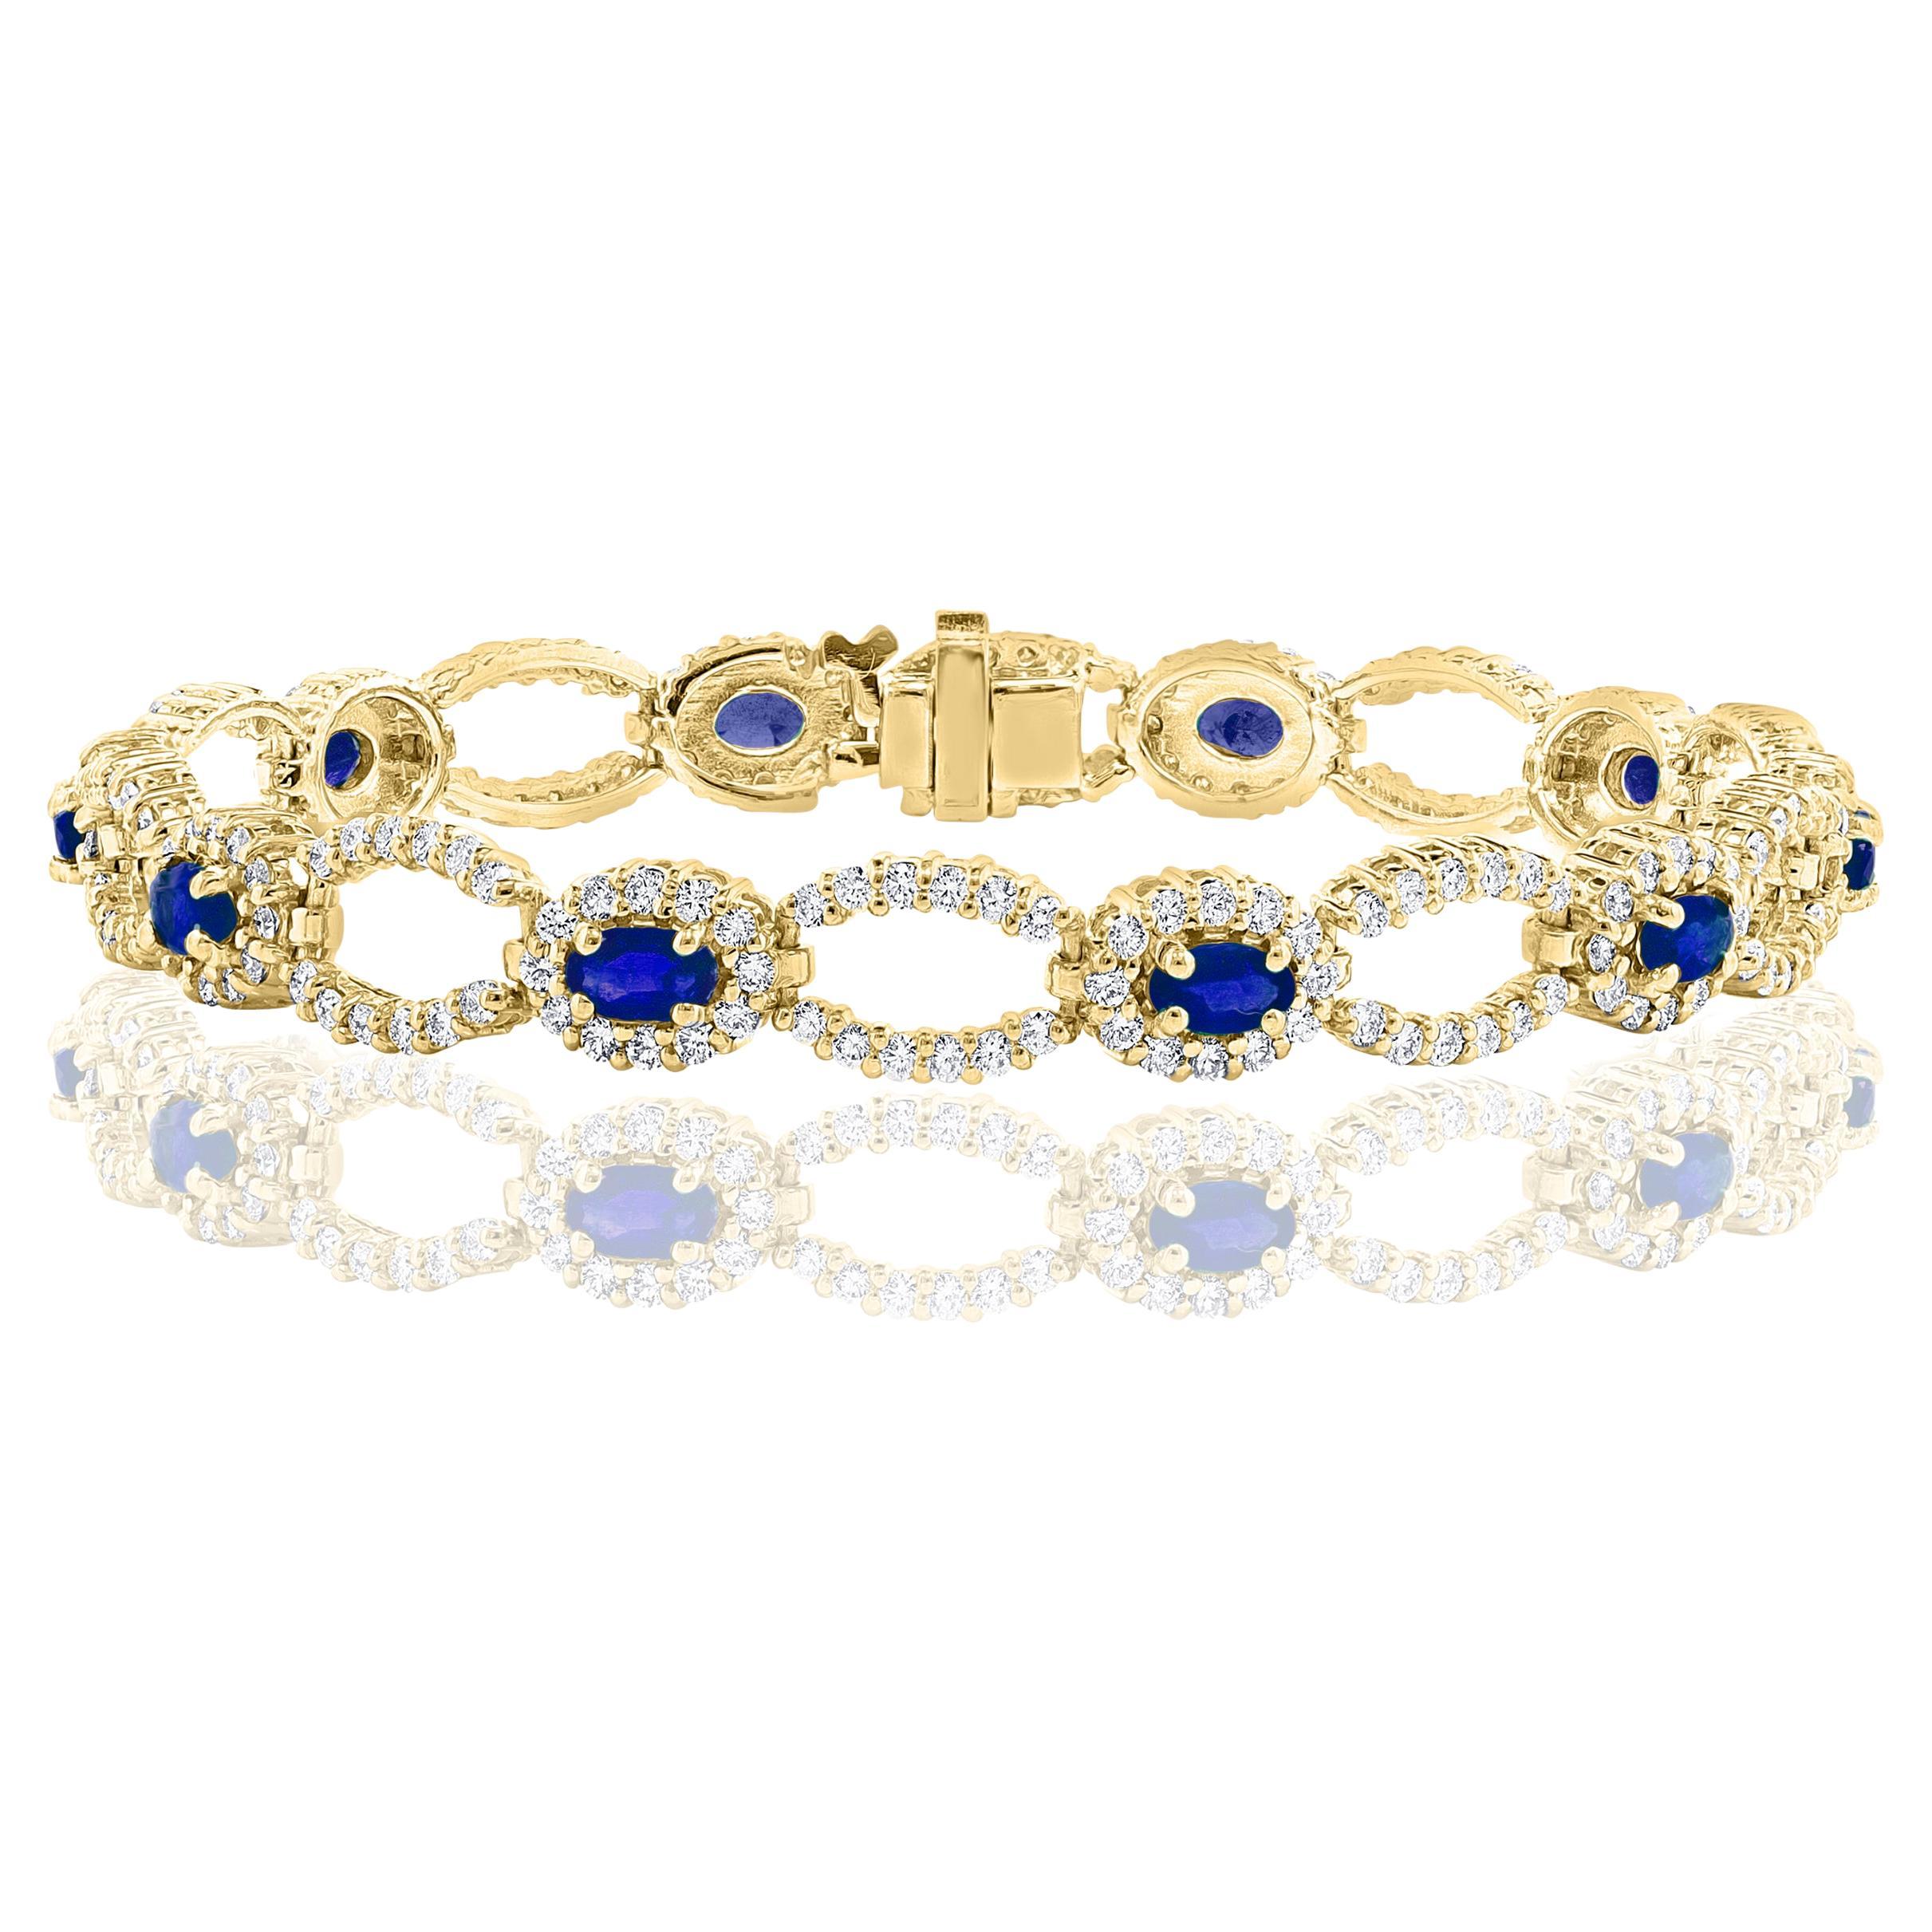 Open-Work 3.60 Carat Blue Sapphire and Diamond Bracelet in 14K Yellow Gold For Sale